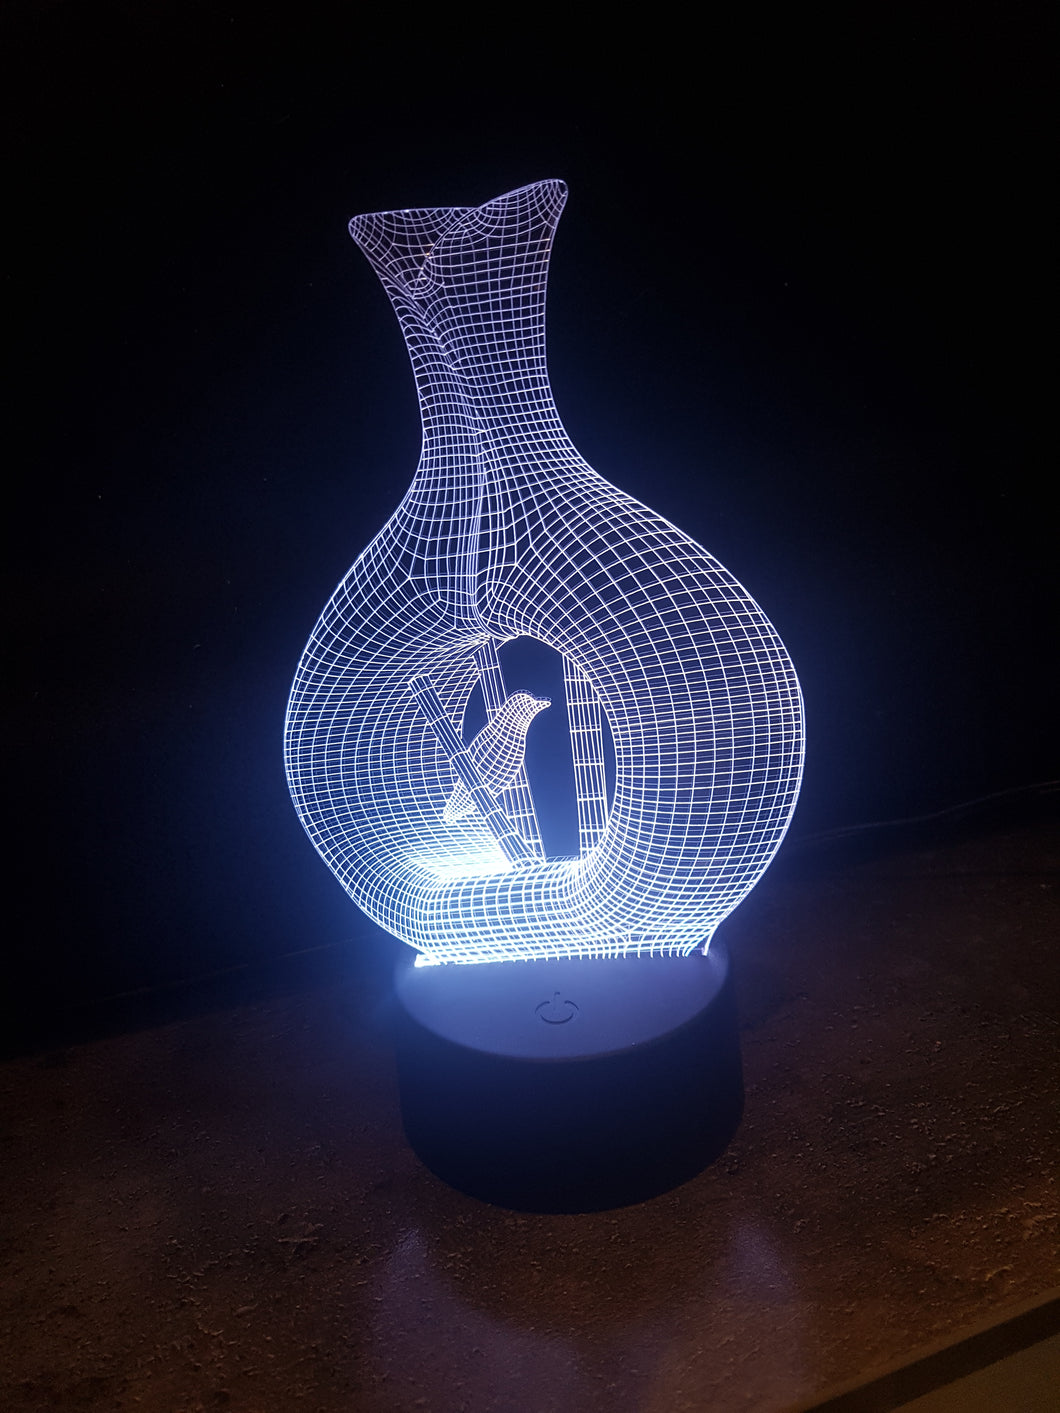 LED light up 3D Vase with bird display. 9 Colour options with remote! - Laser LLama Designs Ltd